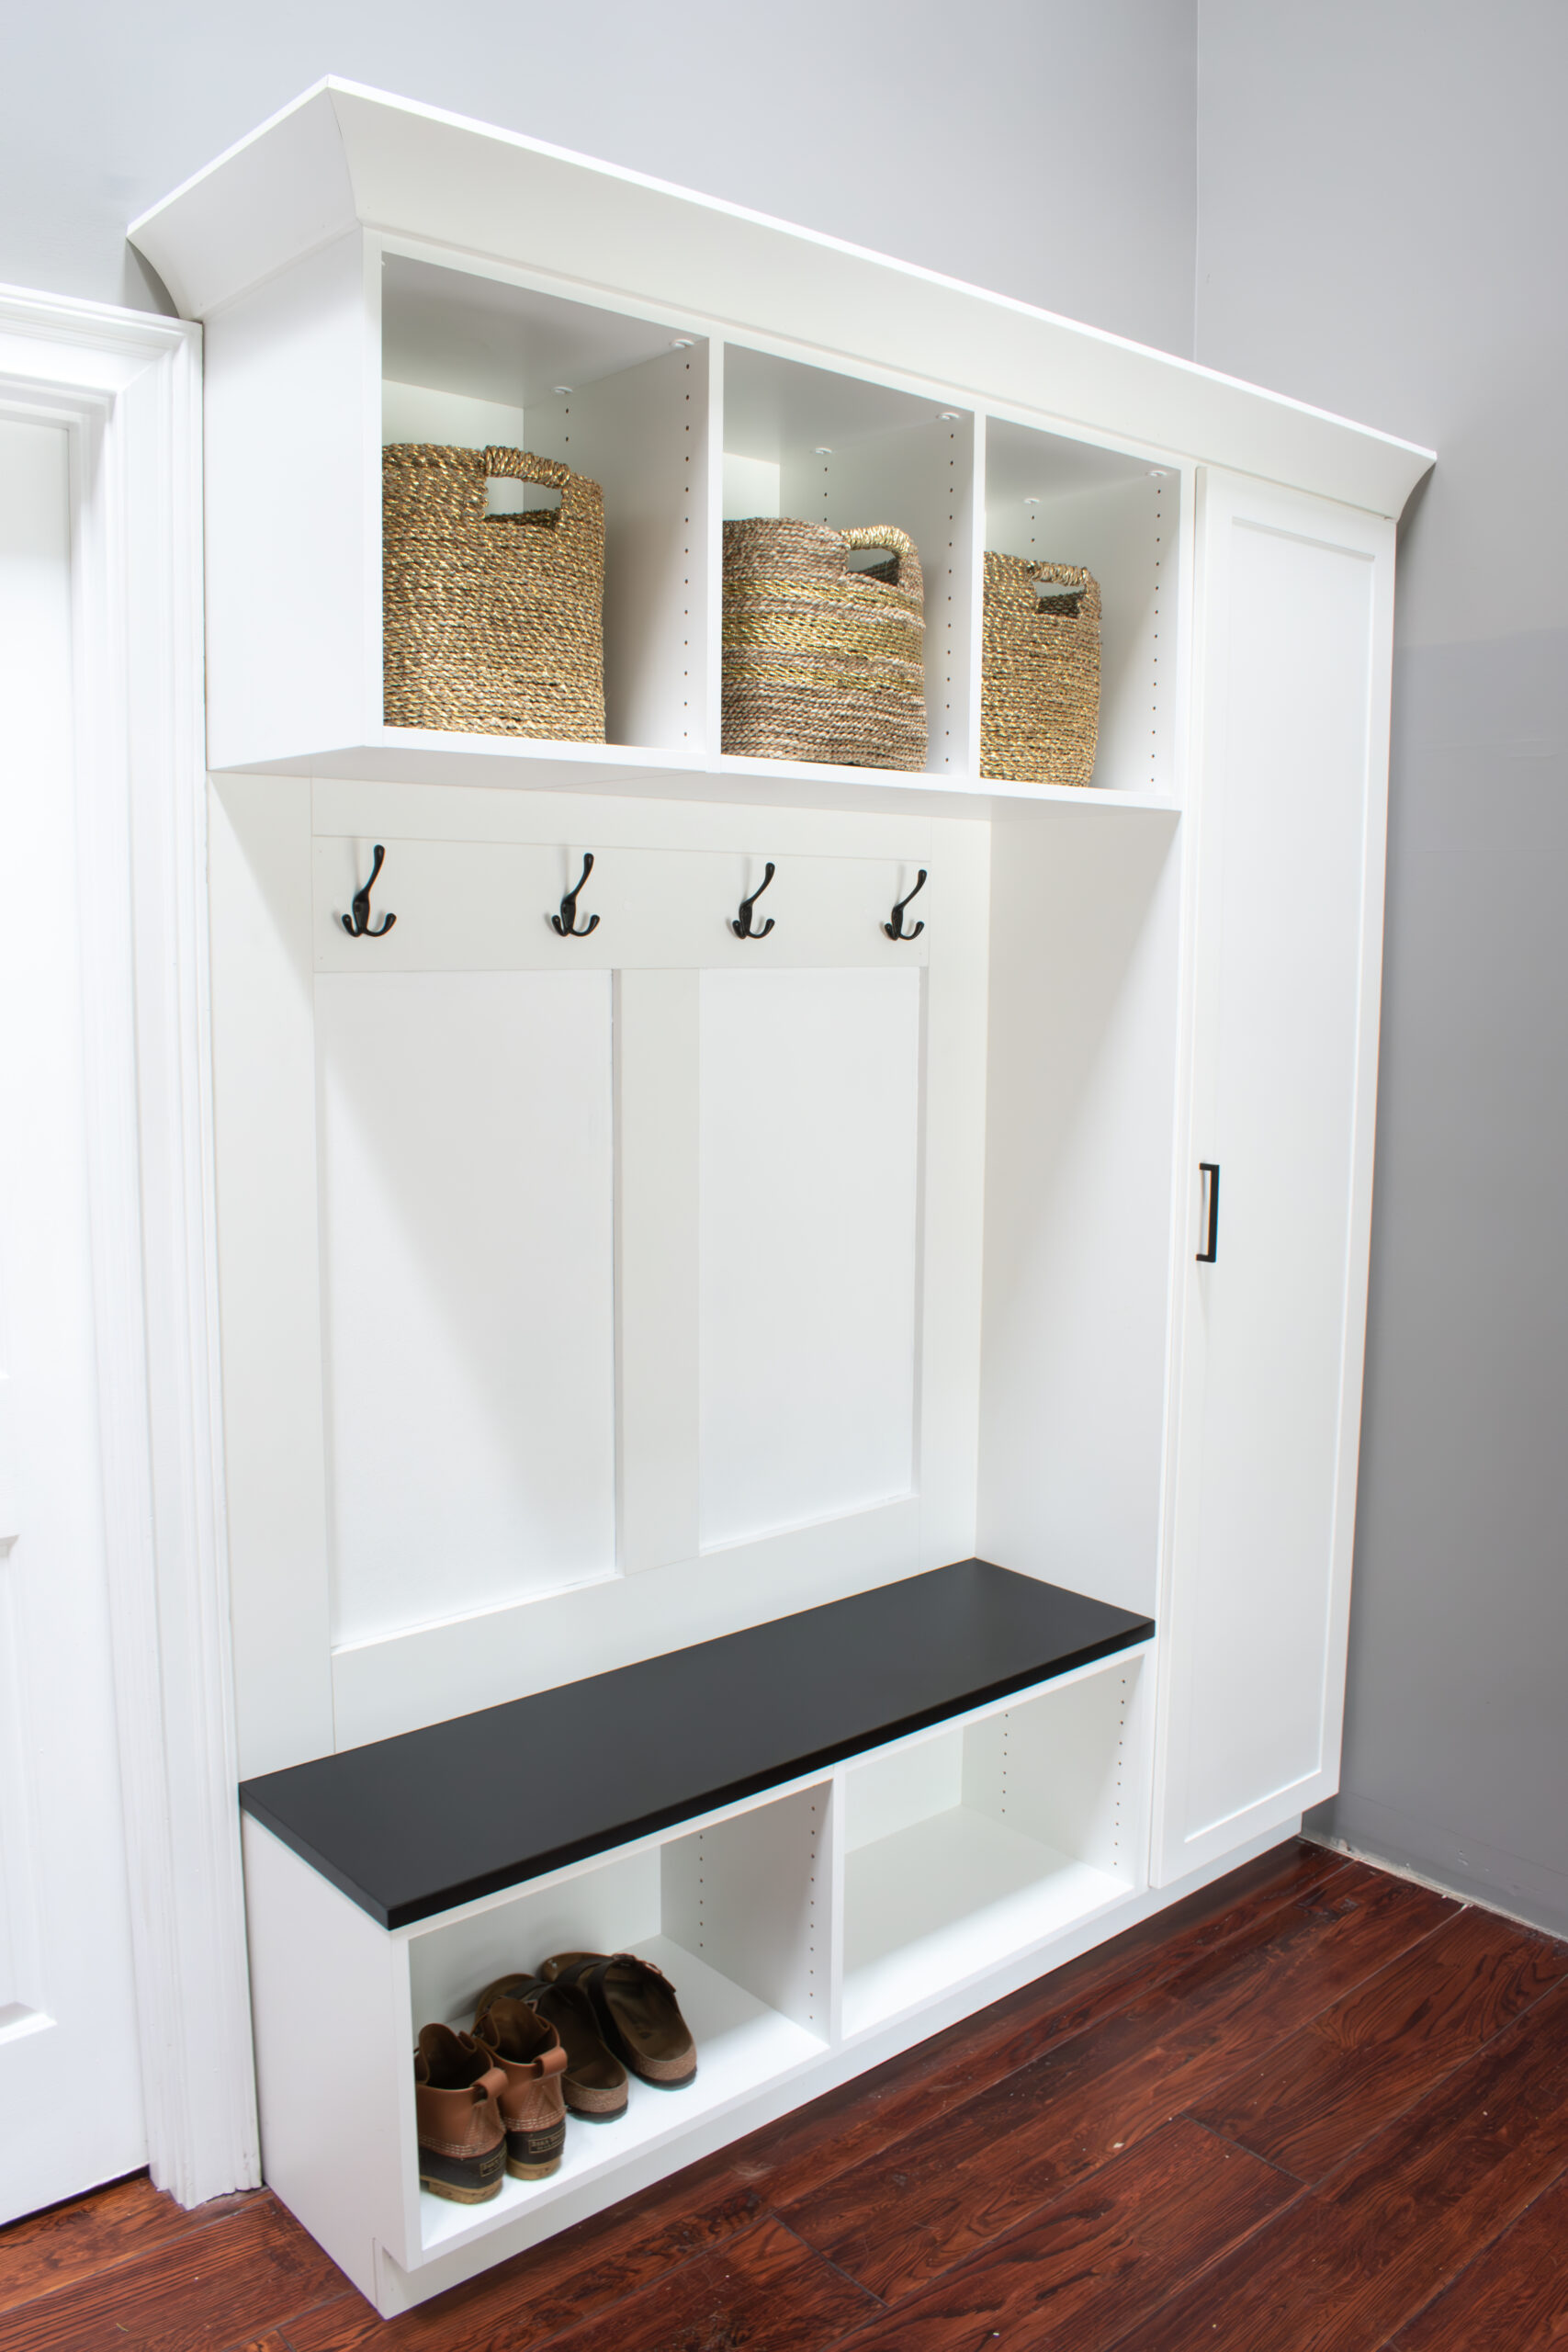 Custom white shaker mudroom with black accents by Custom Closets of GA. It contains one tall cabinet, overhead cubbies, crown molding, coat hooks, a decorative backing, and a bench.